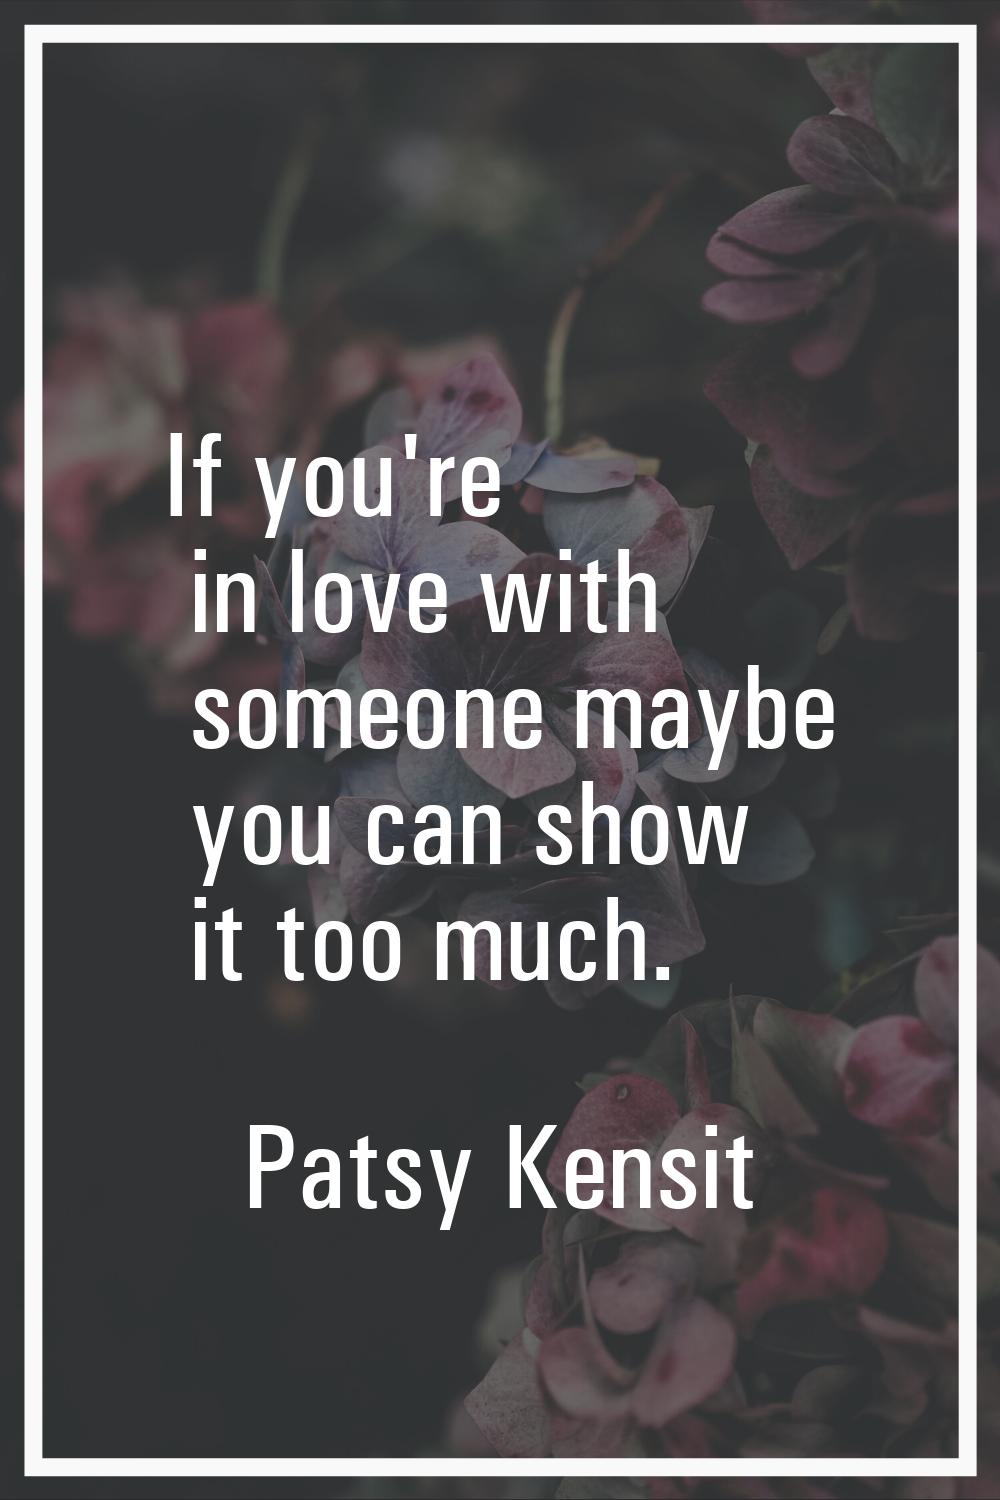 If you're in love with someone maybe you can show it too much.